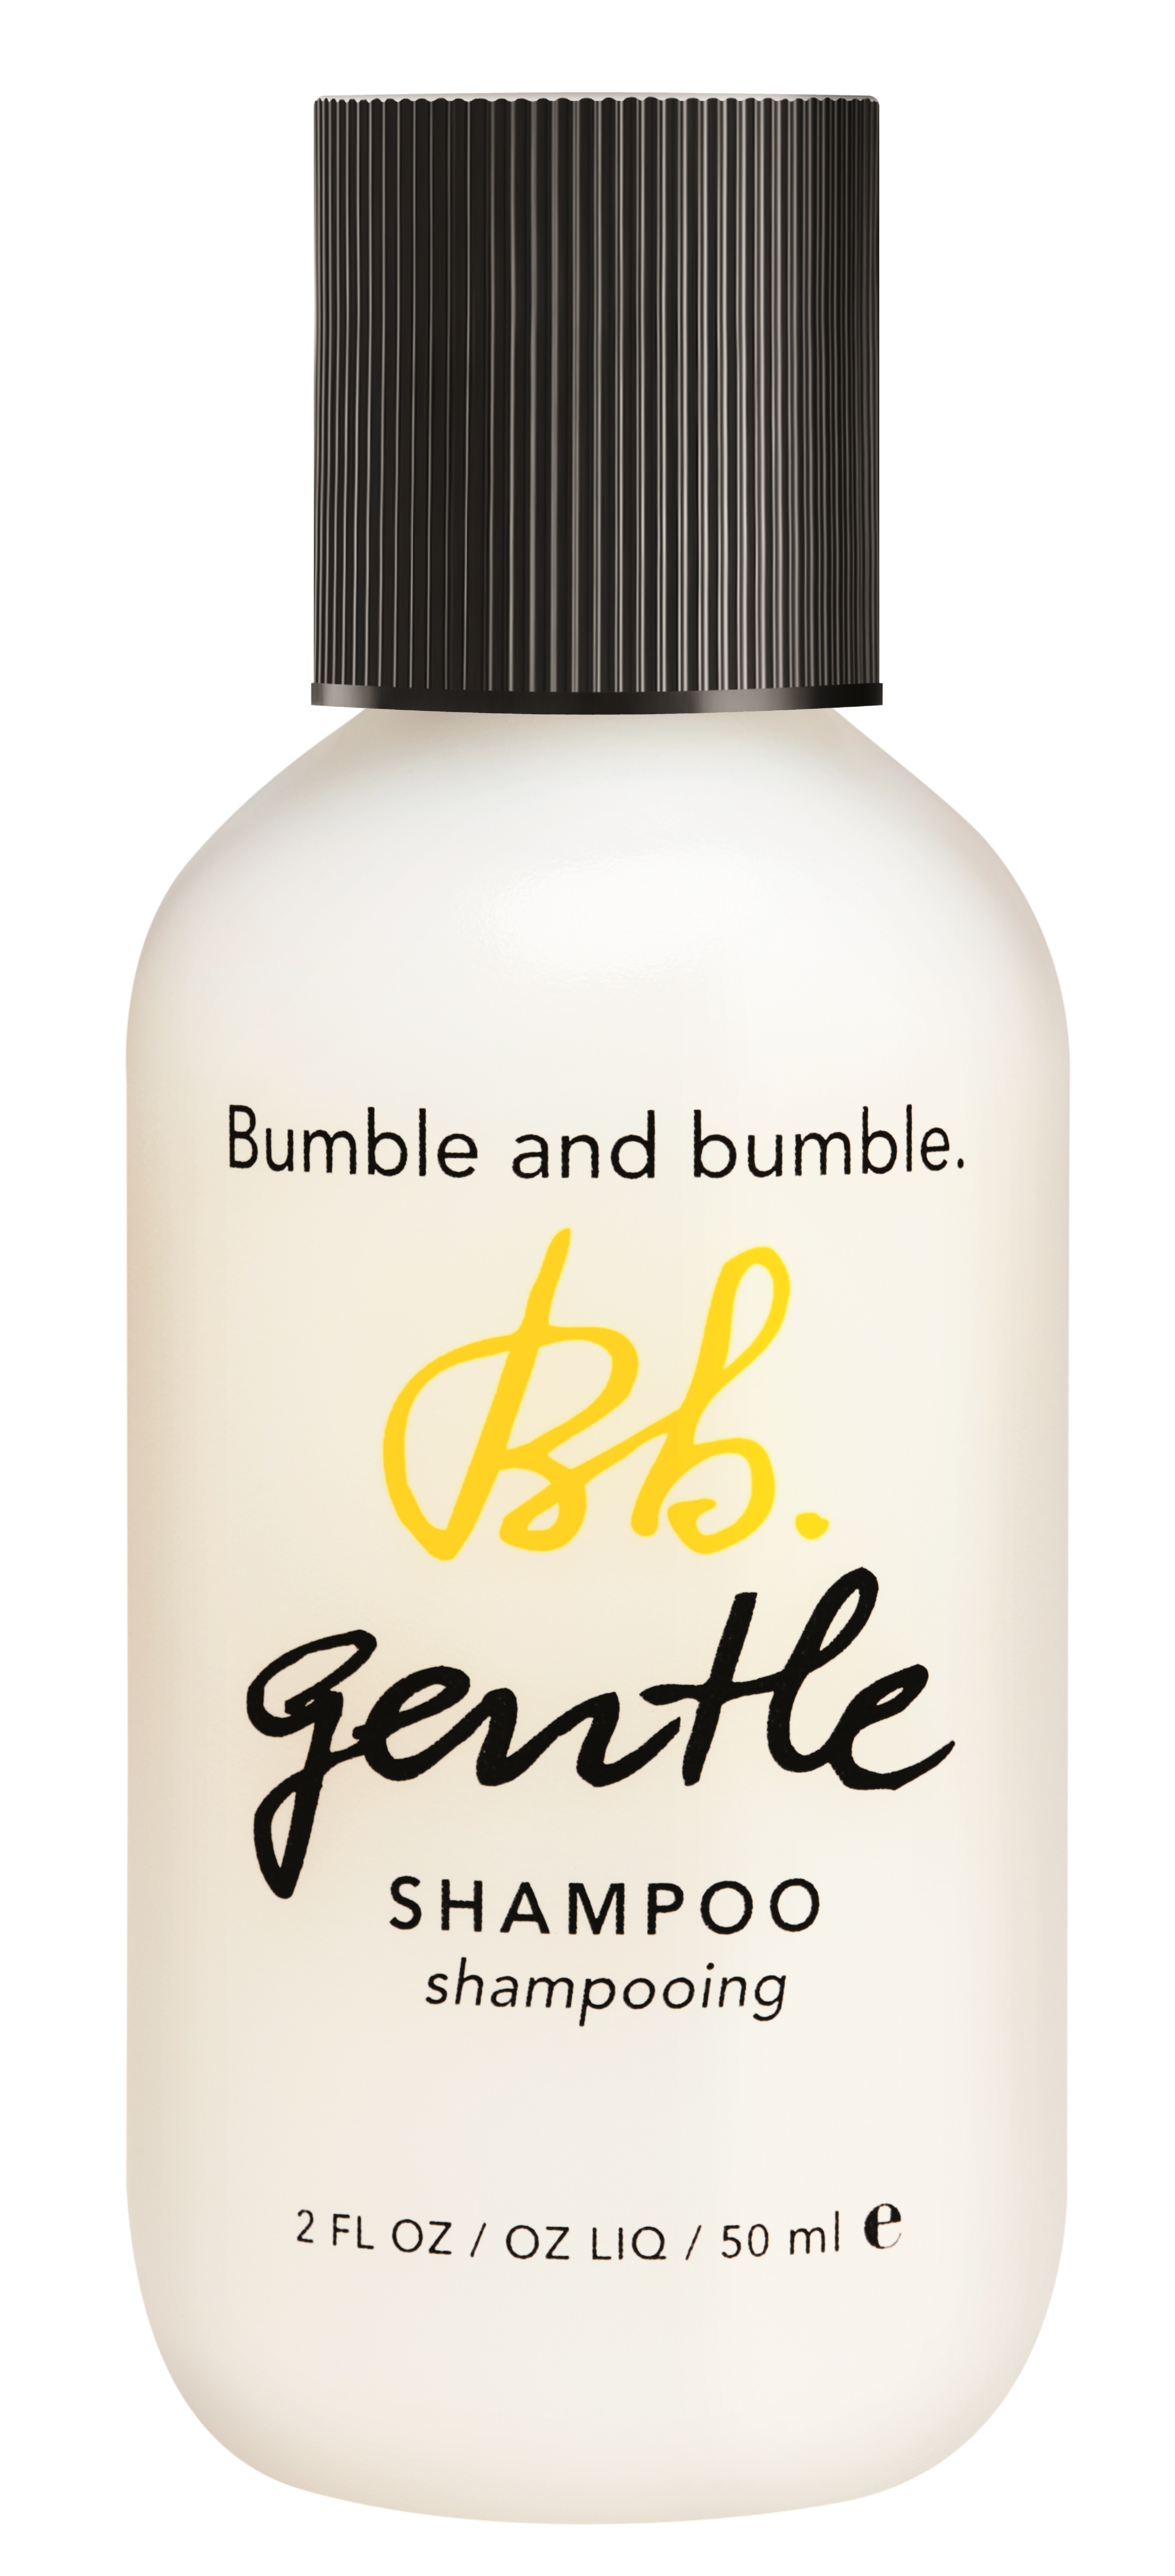 Bumble and bumble Gentle Shampoo 50ml